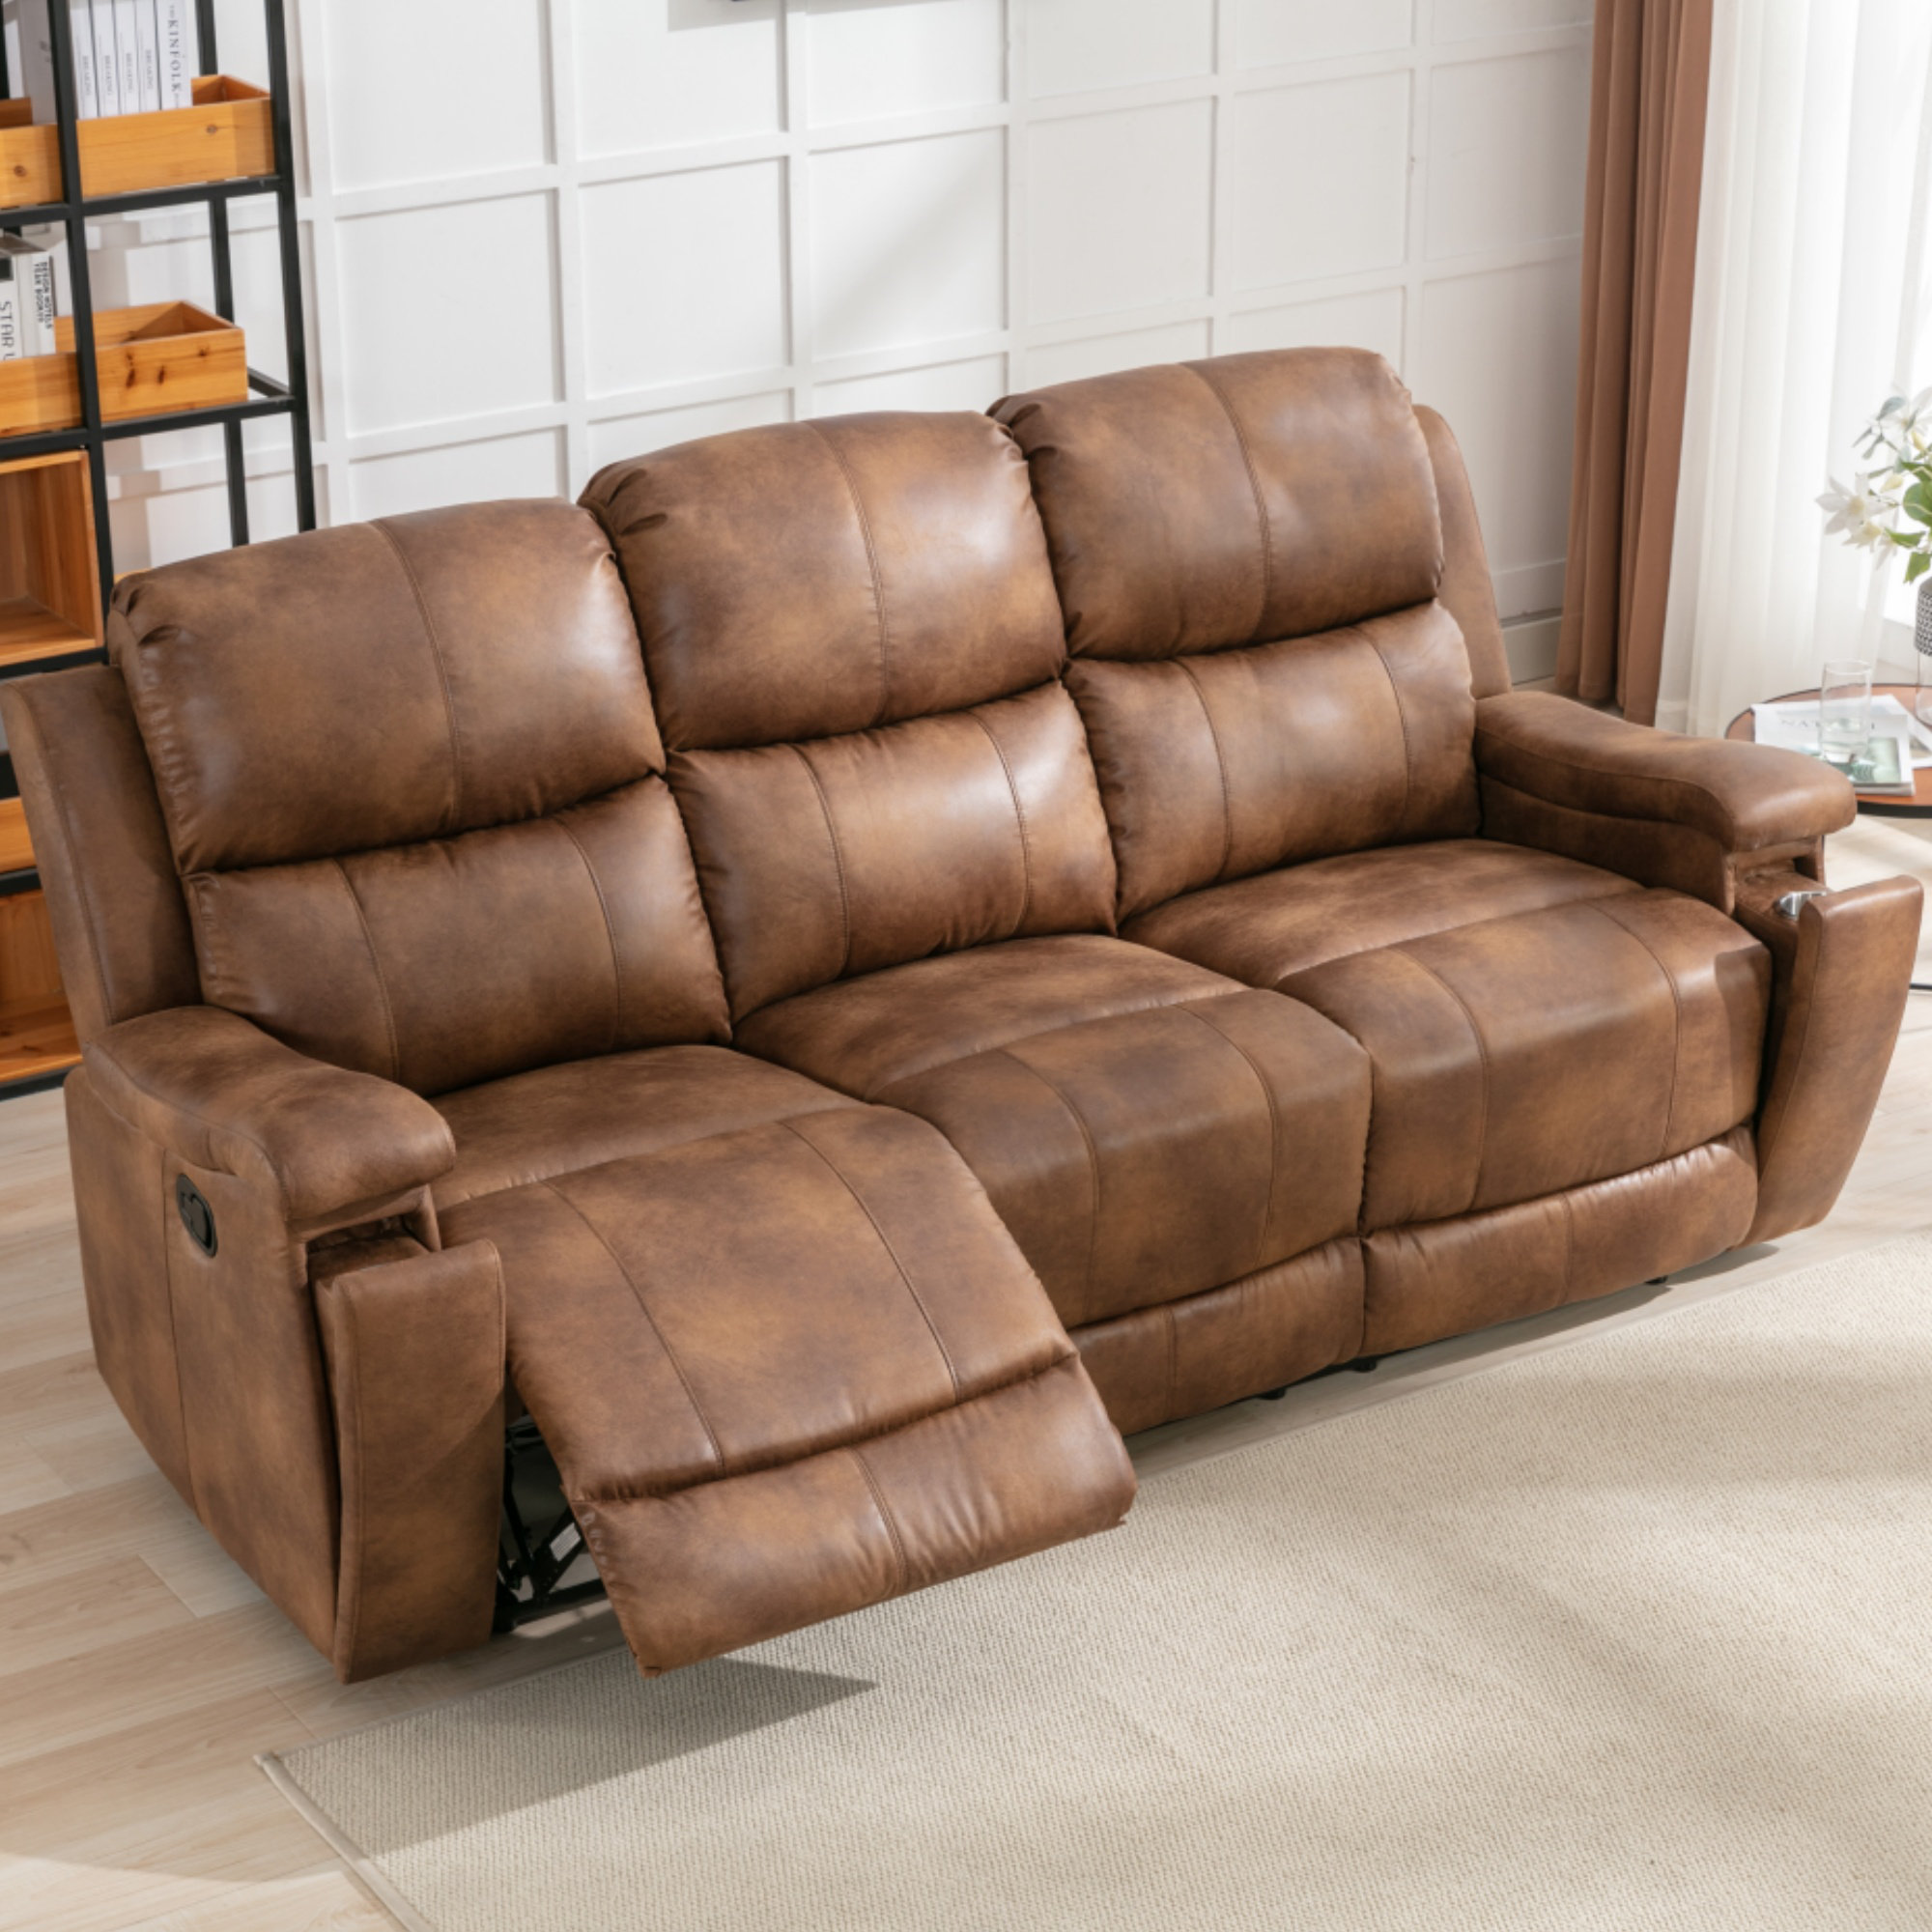 Ilkeston 79 Wide Manual Recliner Sofa Luxurious Cognac Leather with  Integrated Cup Holders Family Comfort